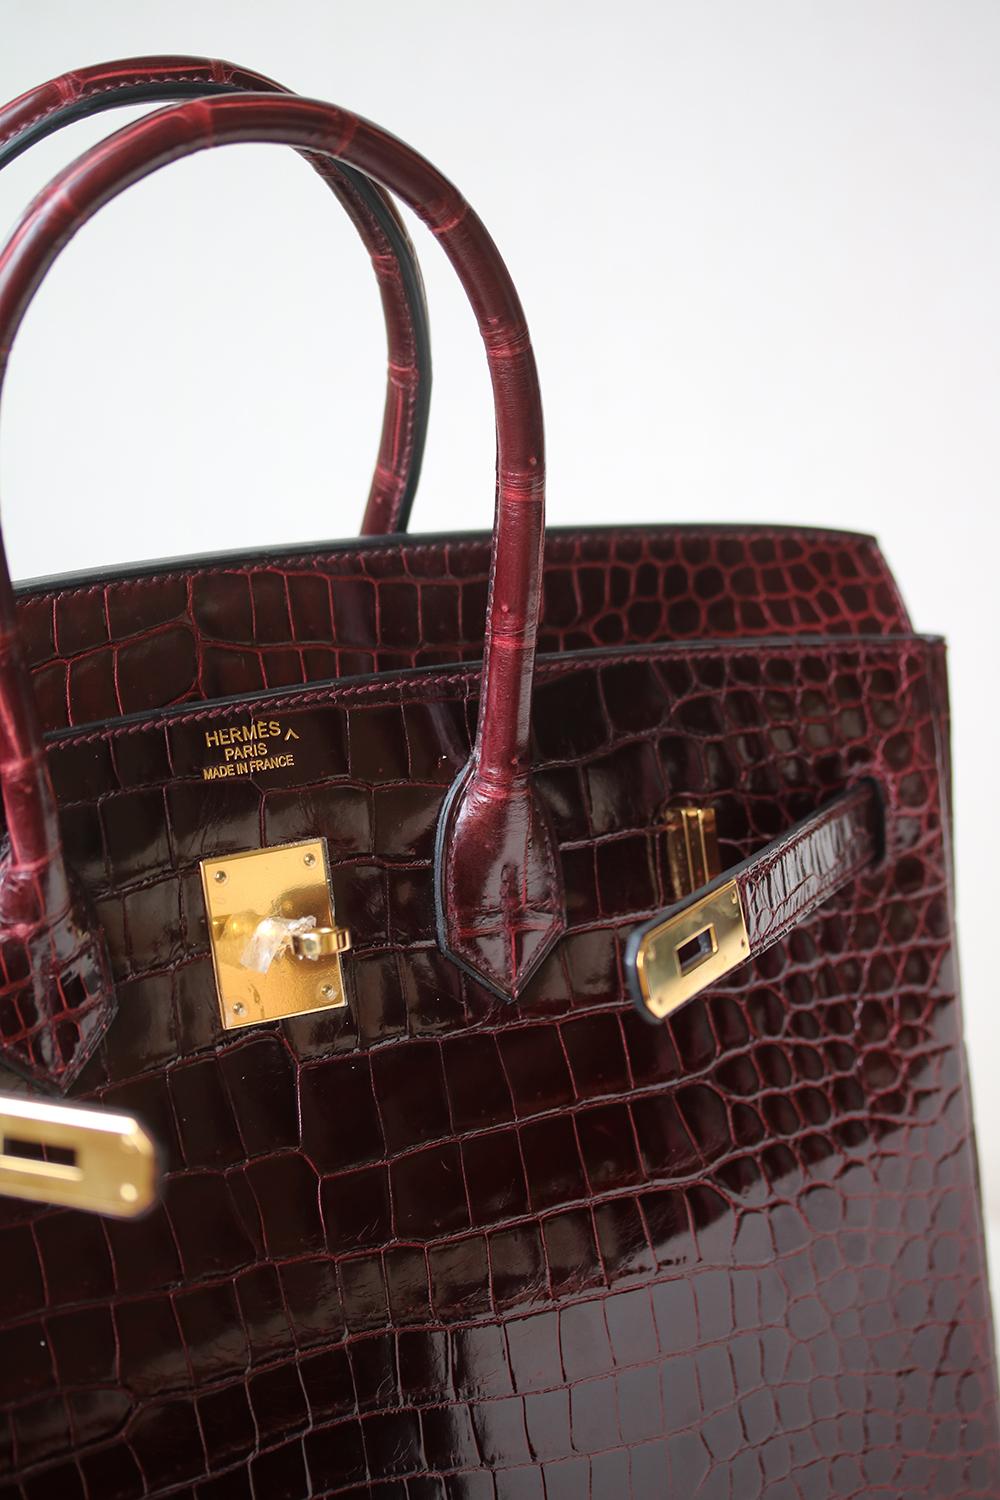 Hermès Burgundy Smooth Porosus Crocodile 35 cm Birkin Bag with Gold Hardware. The most fabulous of all bags can be yours today! Luxuriously rich coloured with tonal top stitching. This Birkin is in excellent condition. Only lightly used. Has been